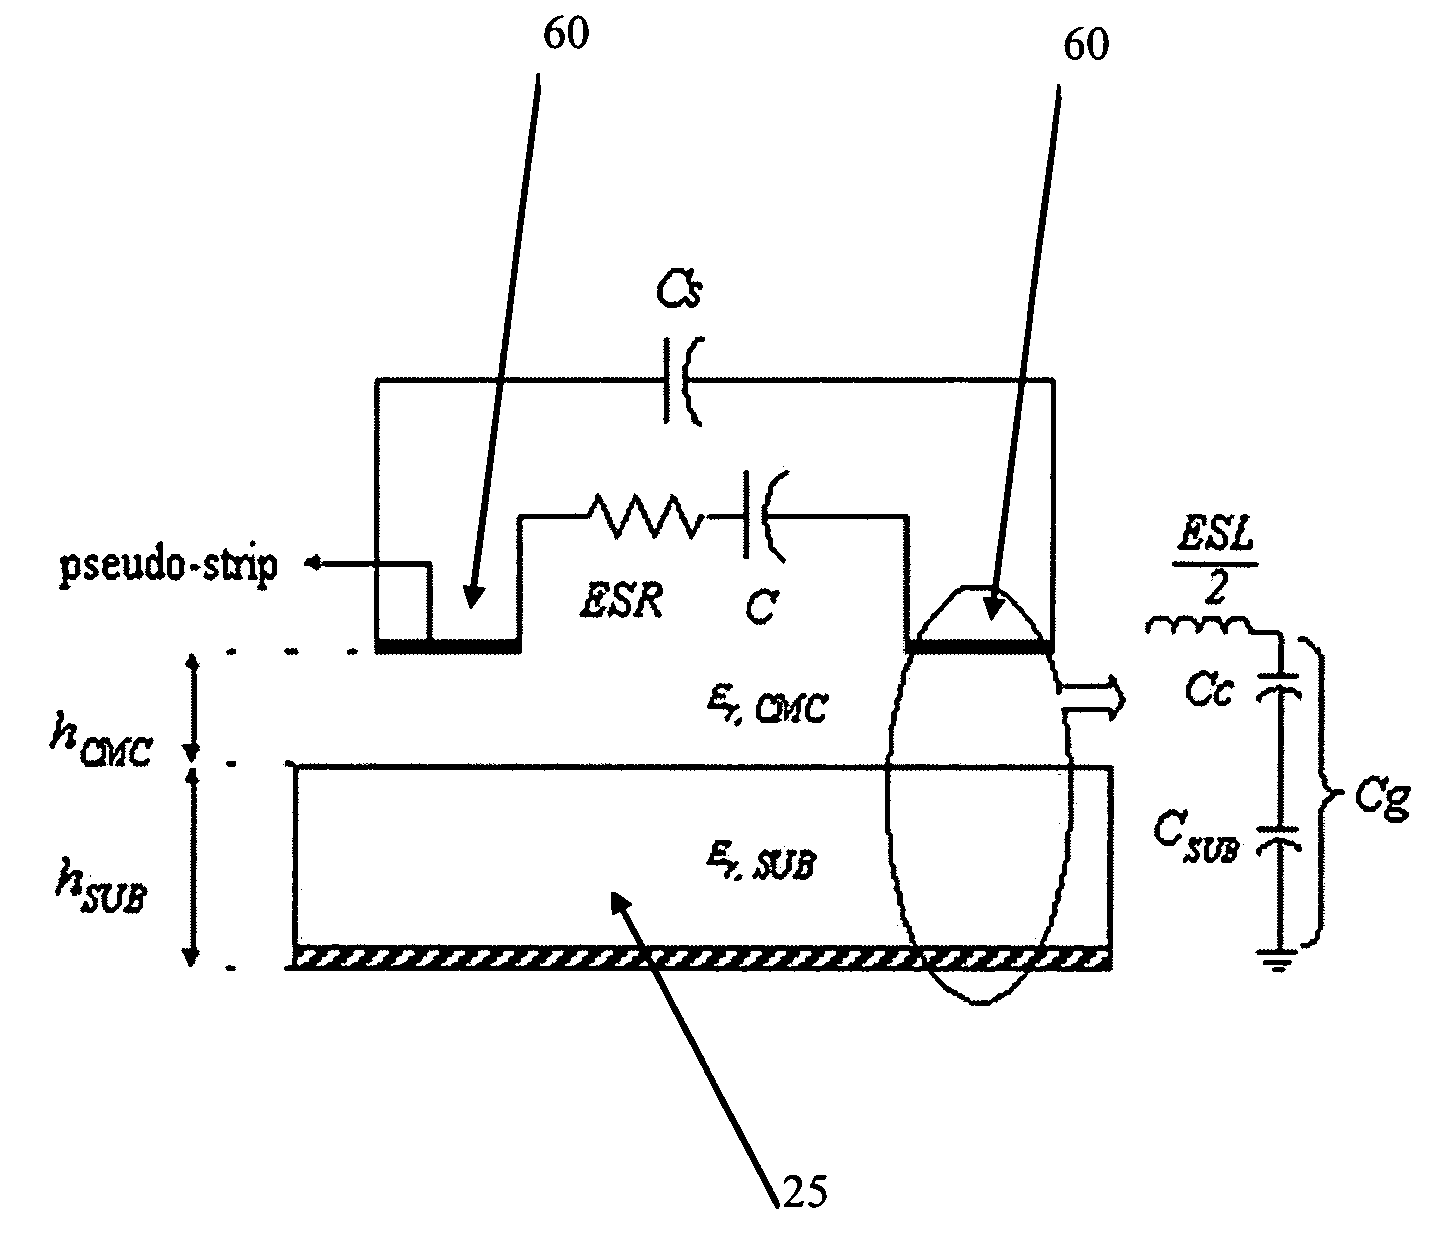 Global equivalent circuit modeling system for substrate mounted circuit components incorporating substrate dependent characteristics